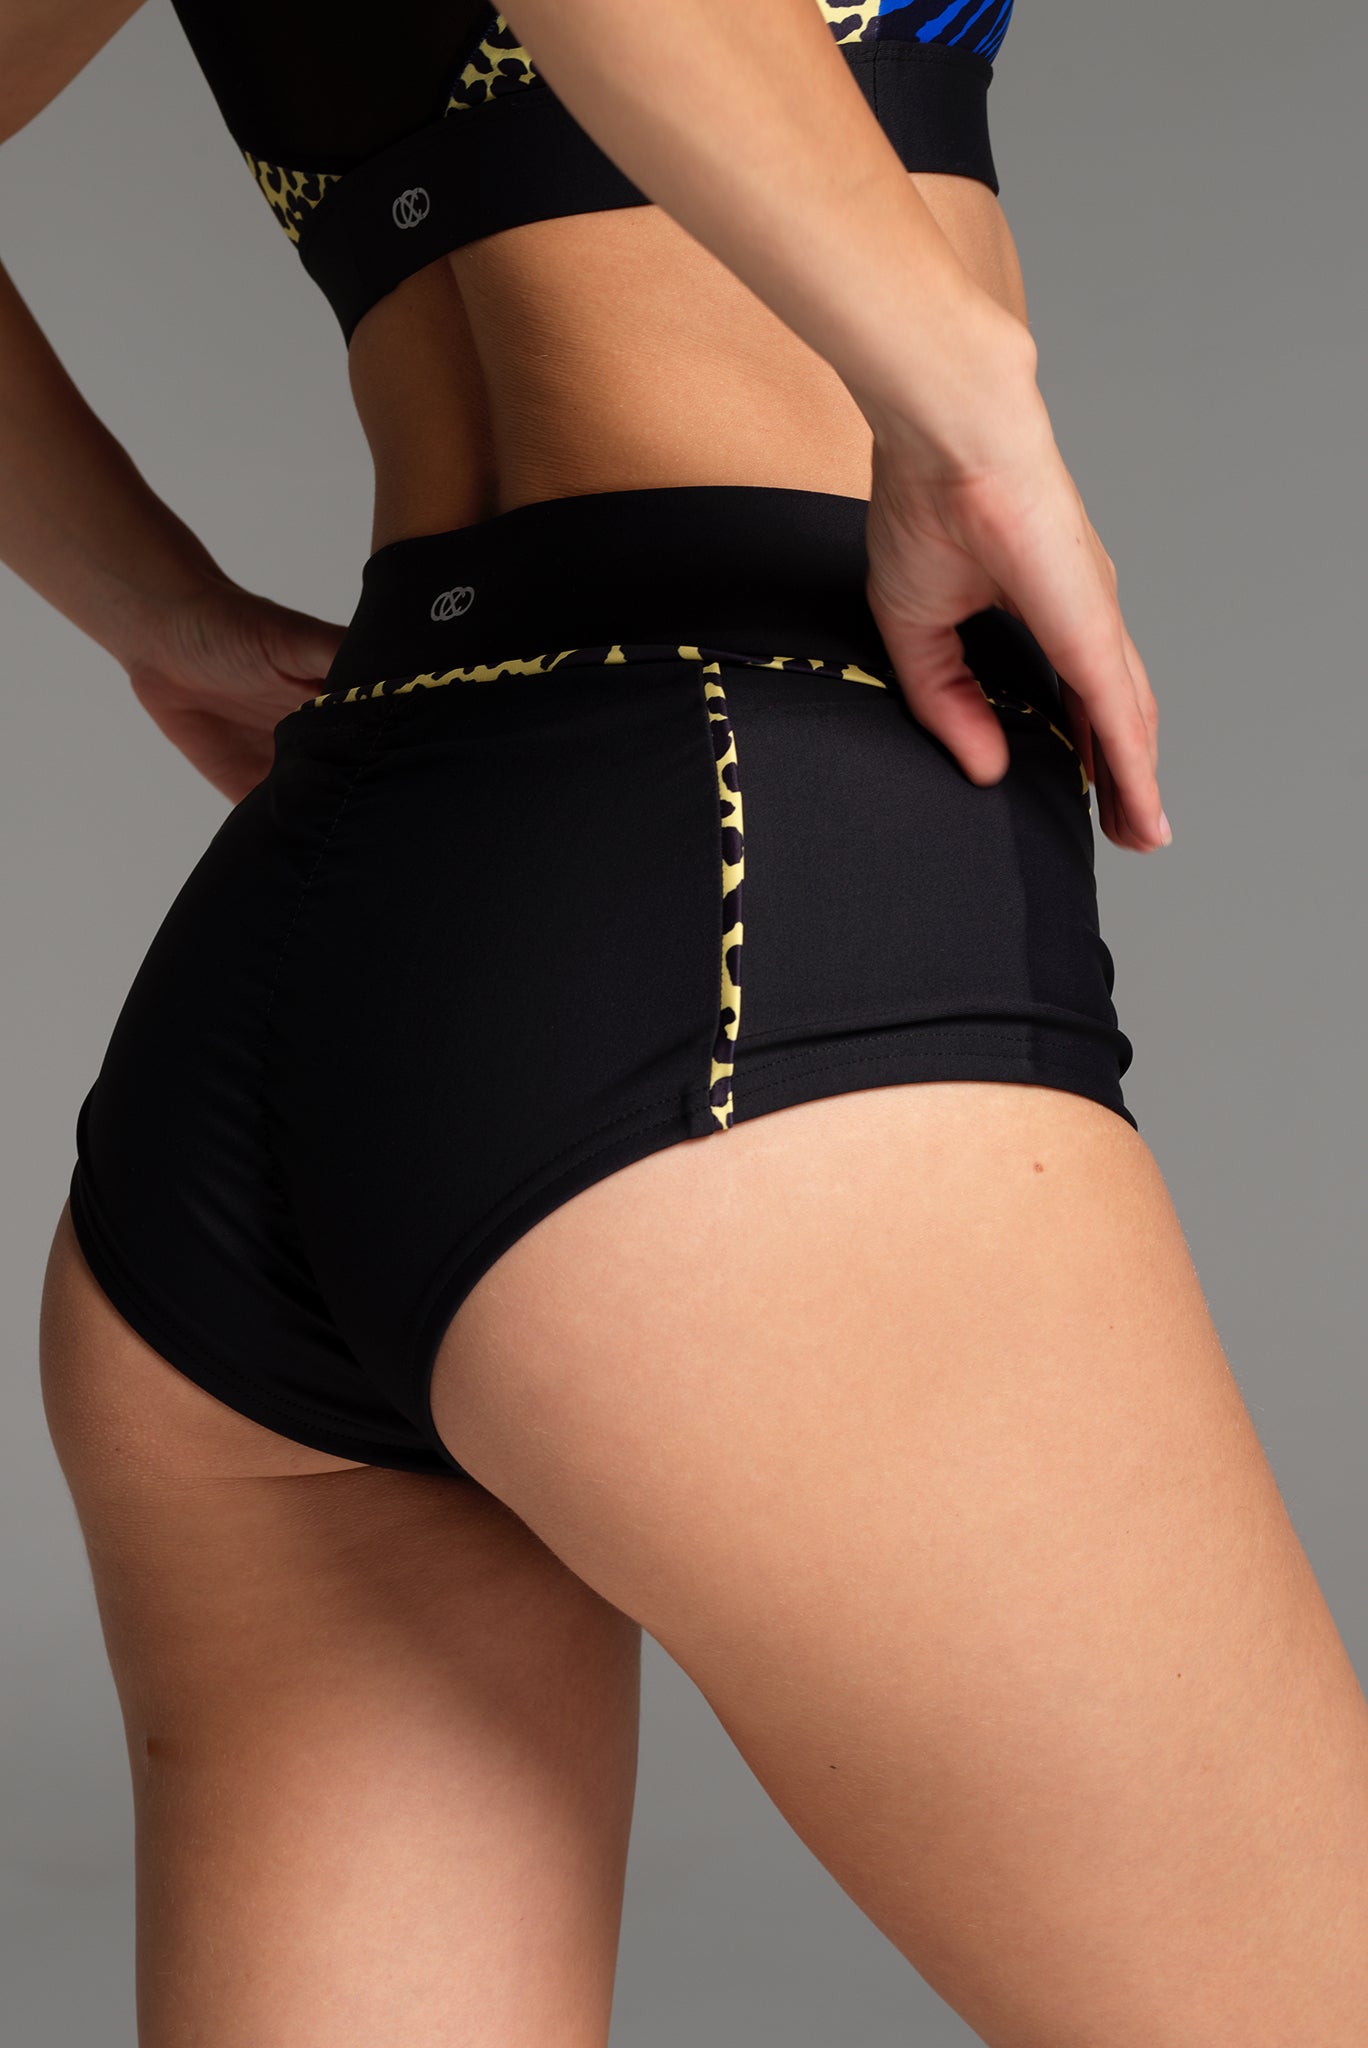 Rear view of the X Trainer Sports Short. The leg line is accentuated by the high waist design, while coverage across the bum remains.